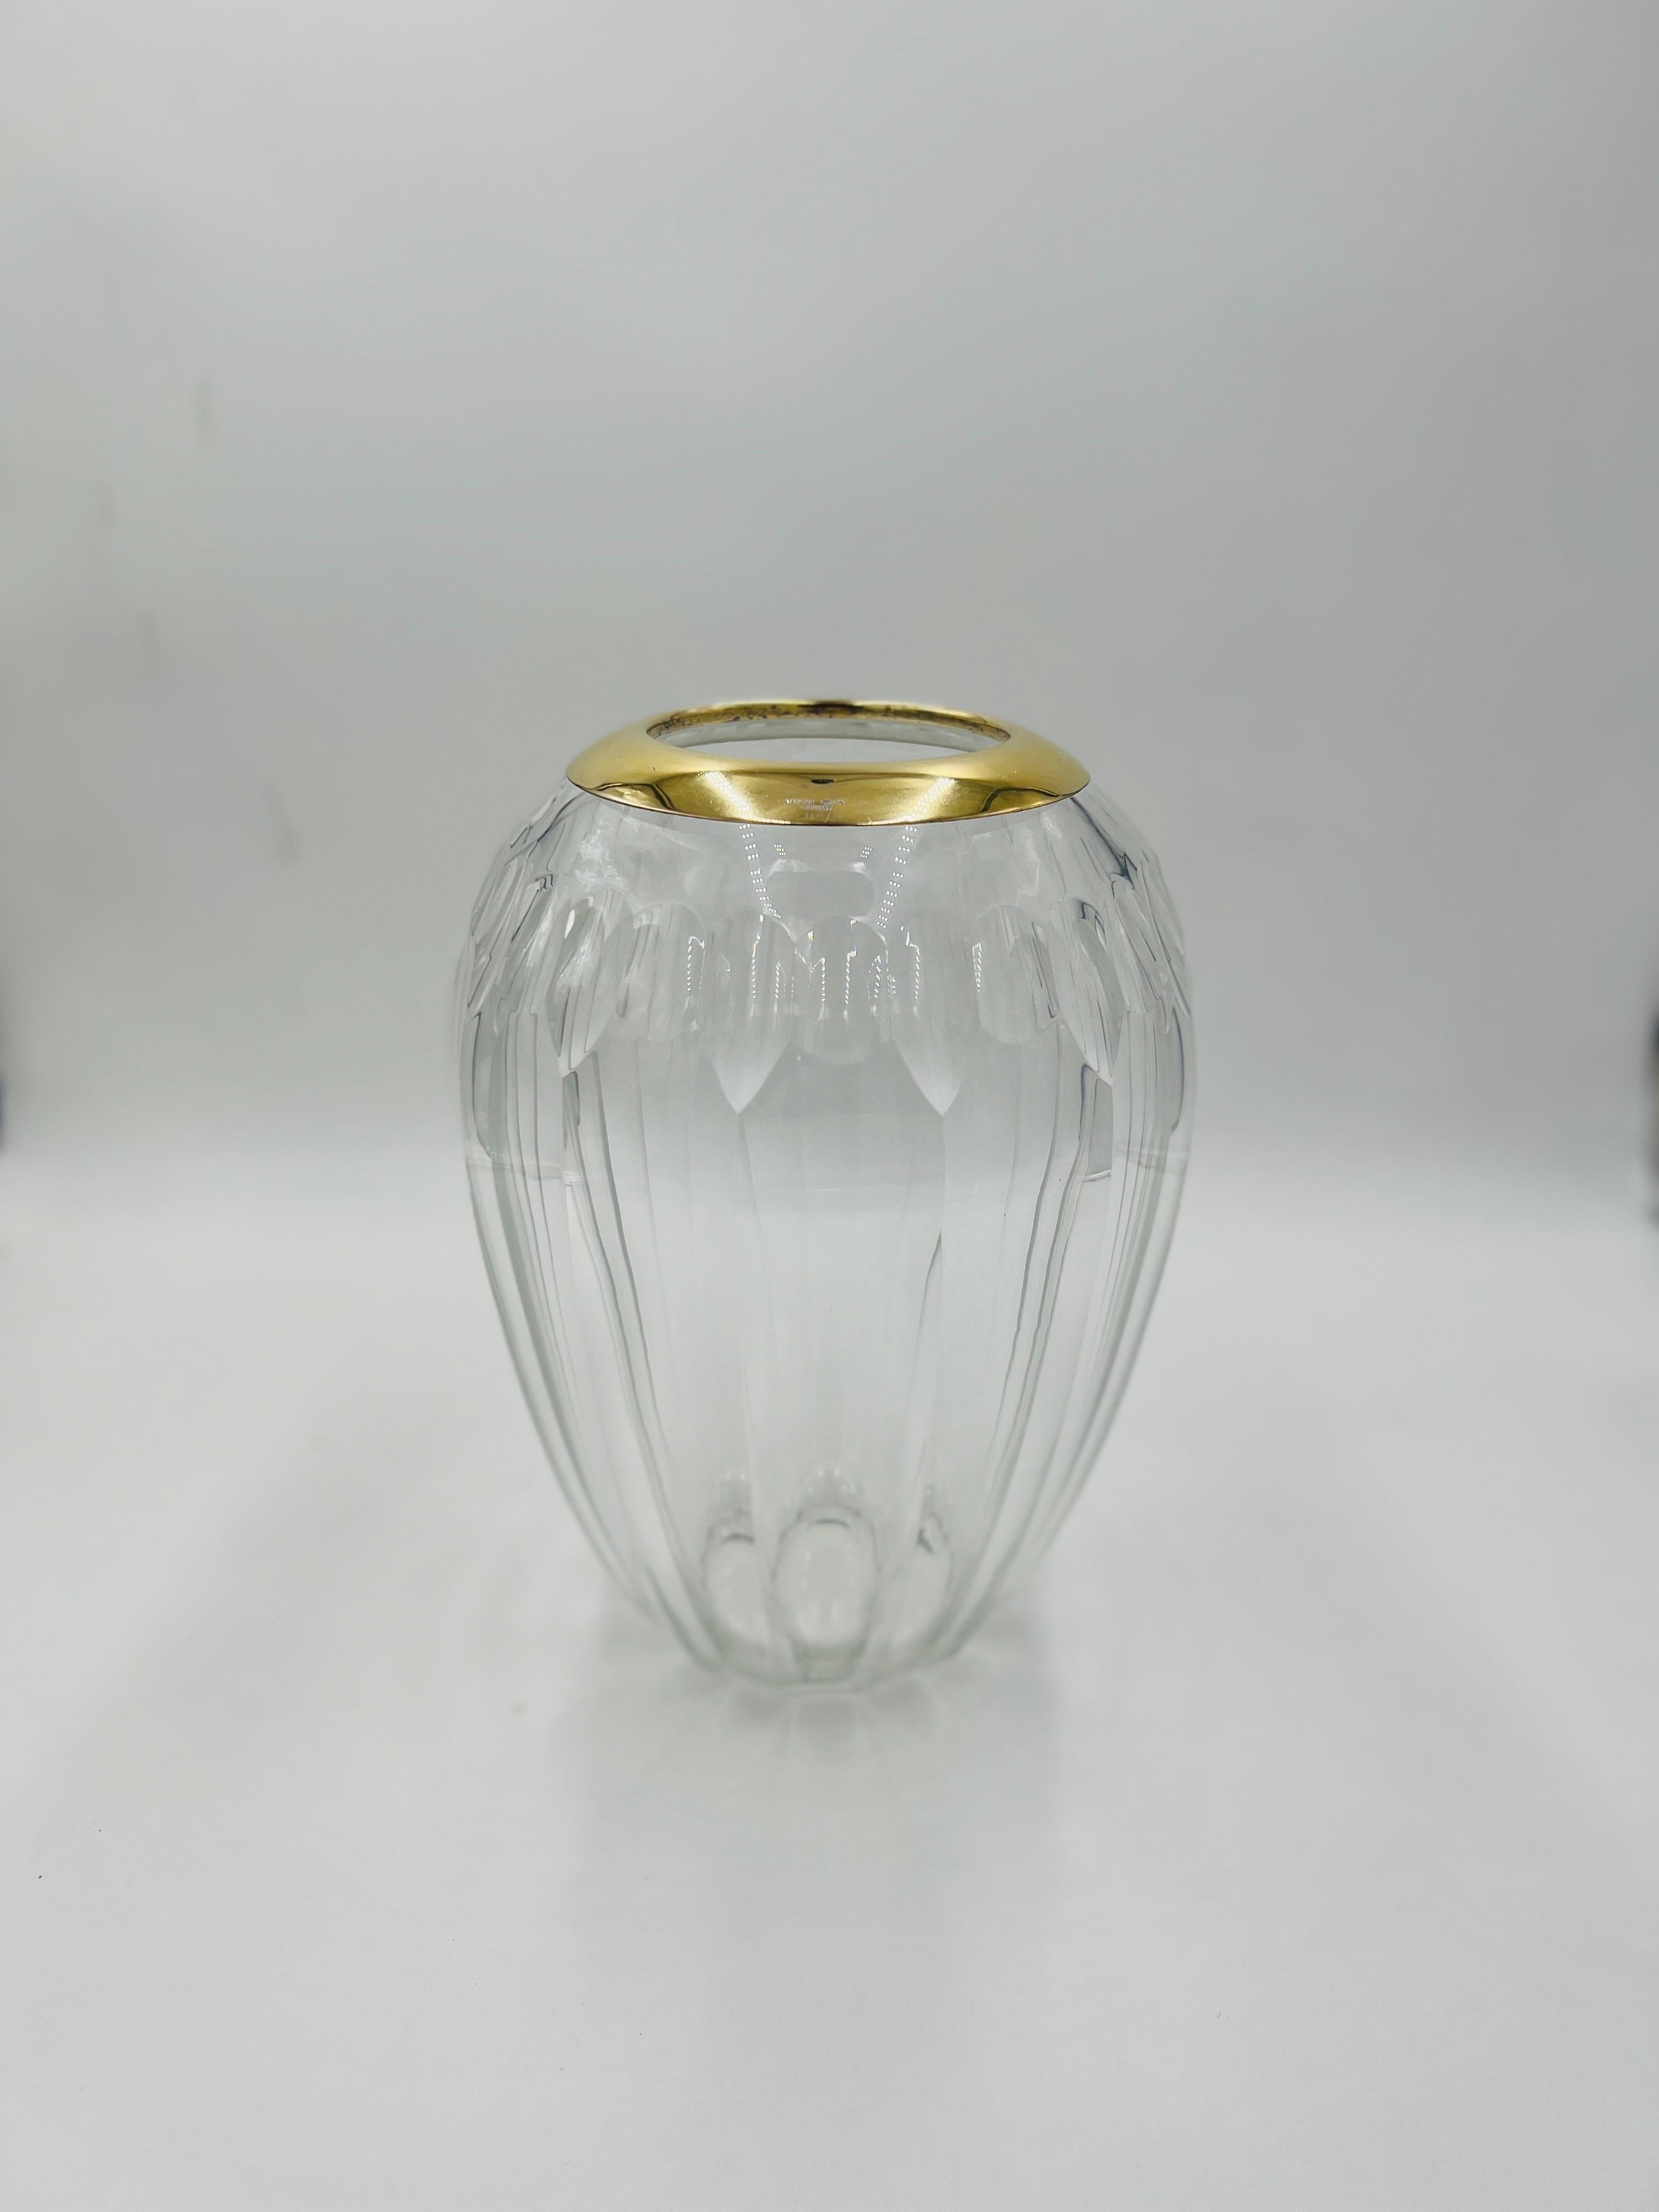 A Tiffany & Company gold over sterling silver banded crystal vase. The vase made of German cut crystal with faceting to main body. Marked “Sterling, Germany, Tiffany & Company”. Vase itself is unmarked.